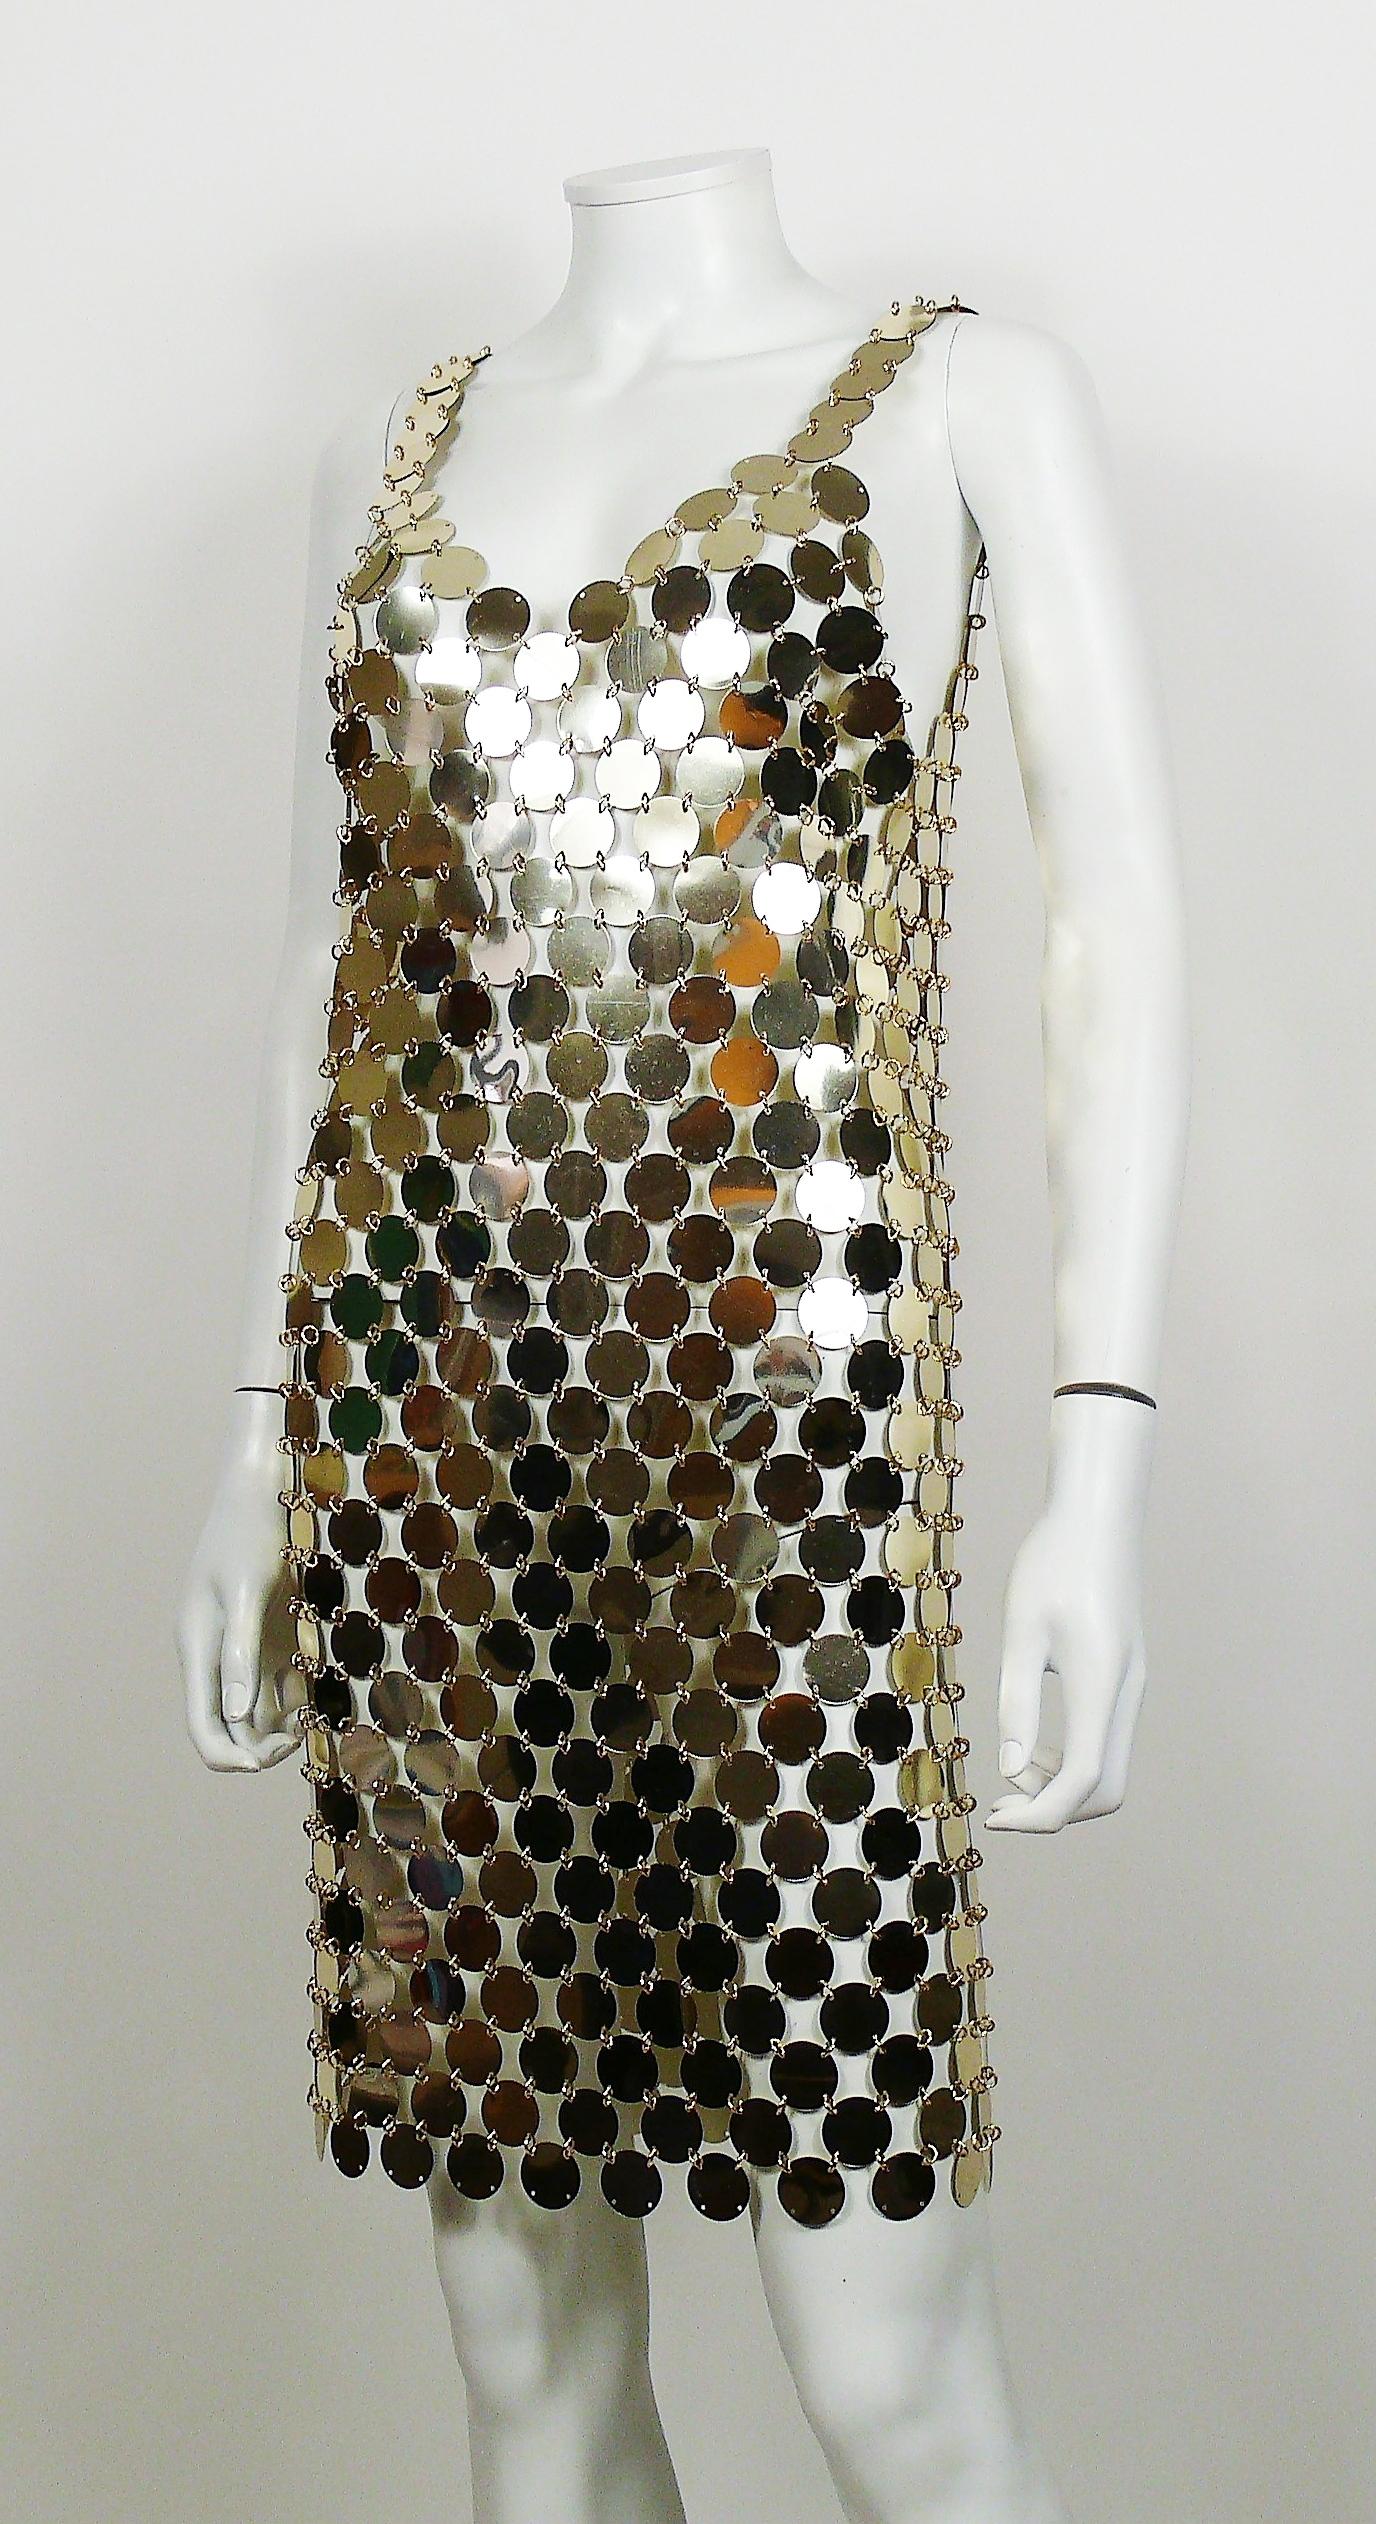 Paco Rabanne Vintage 1996 Gold Rhodoid Disc Do It Yourself Dress 5